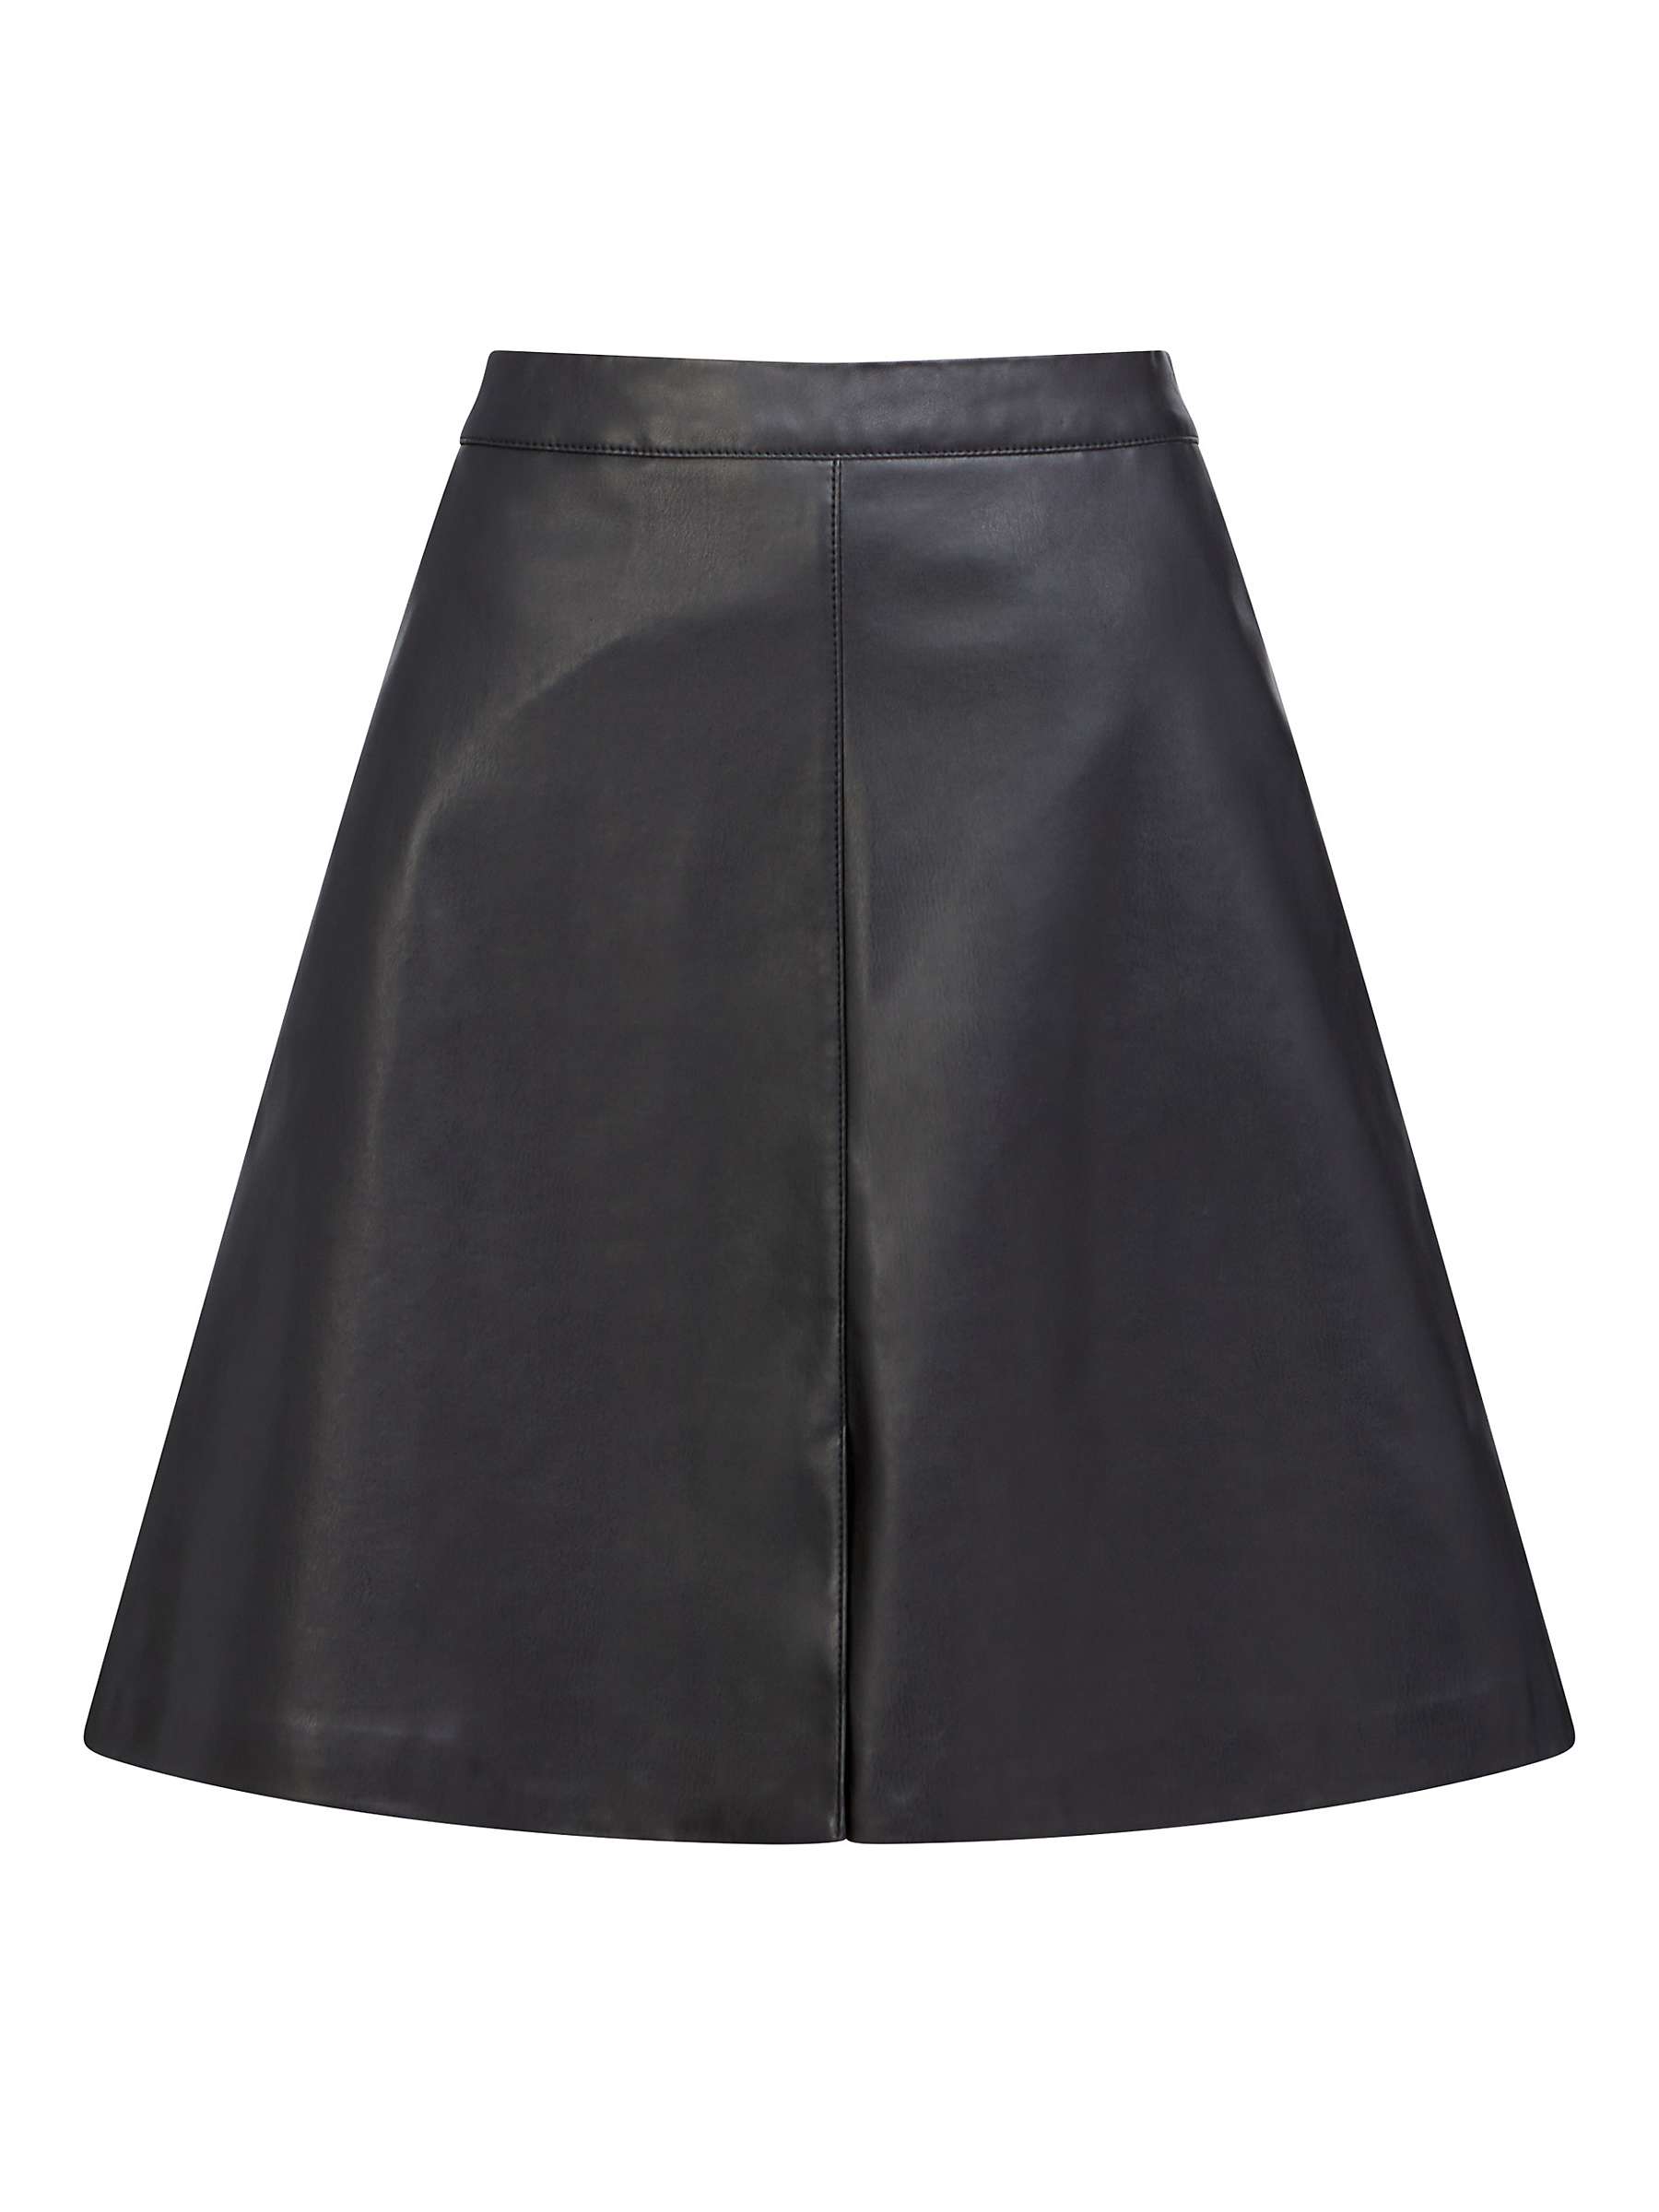 Buy Great Plains Ania Faux Leather Skirt Online at johnlewis.com